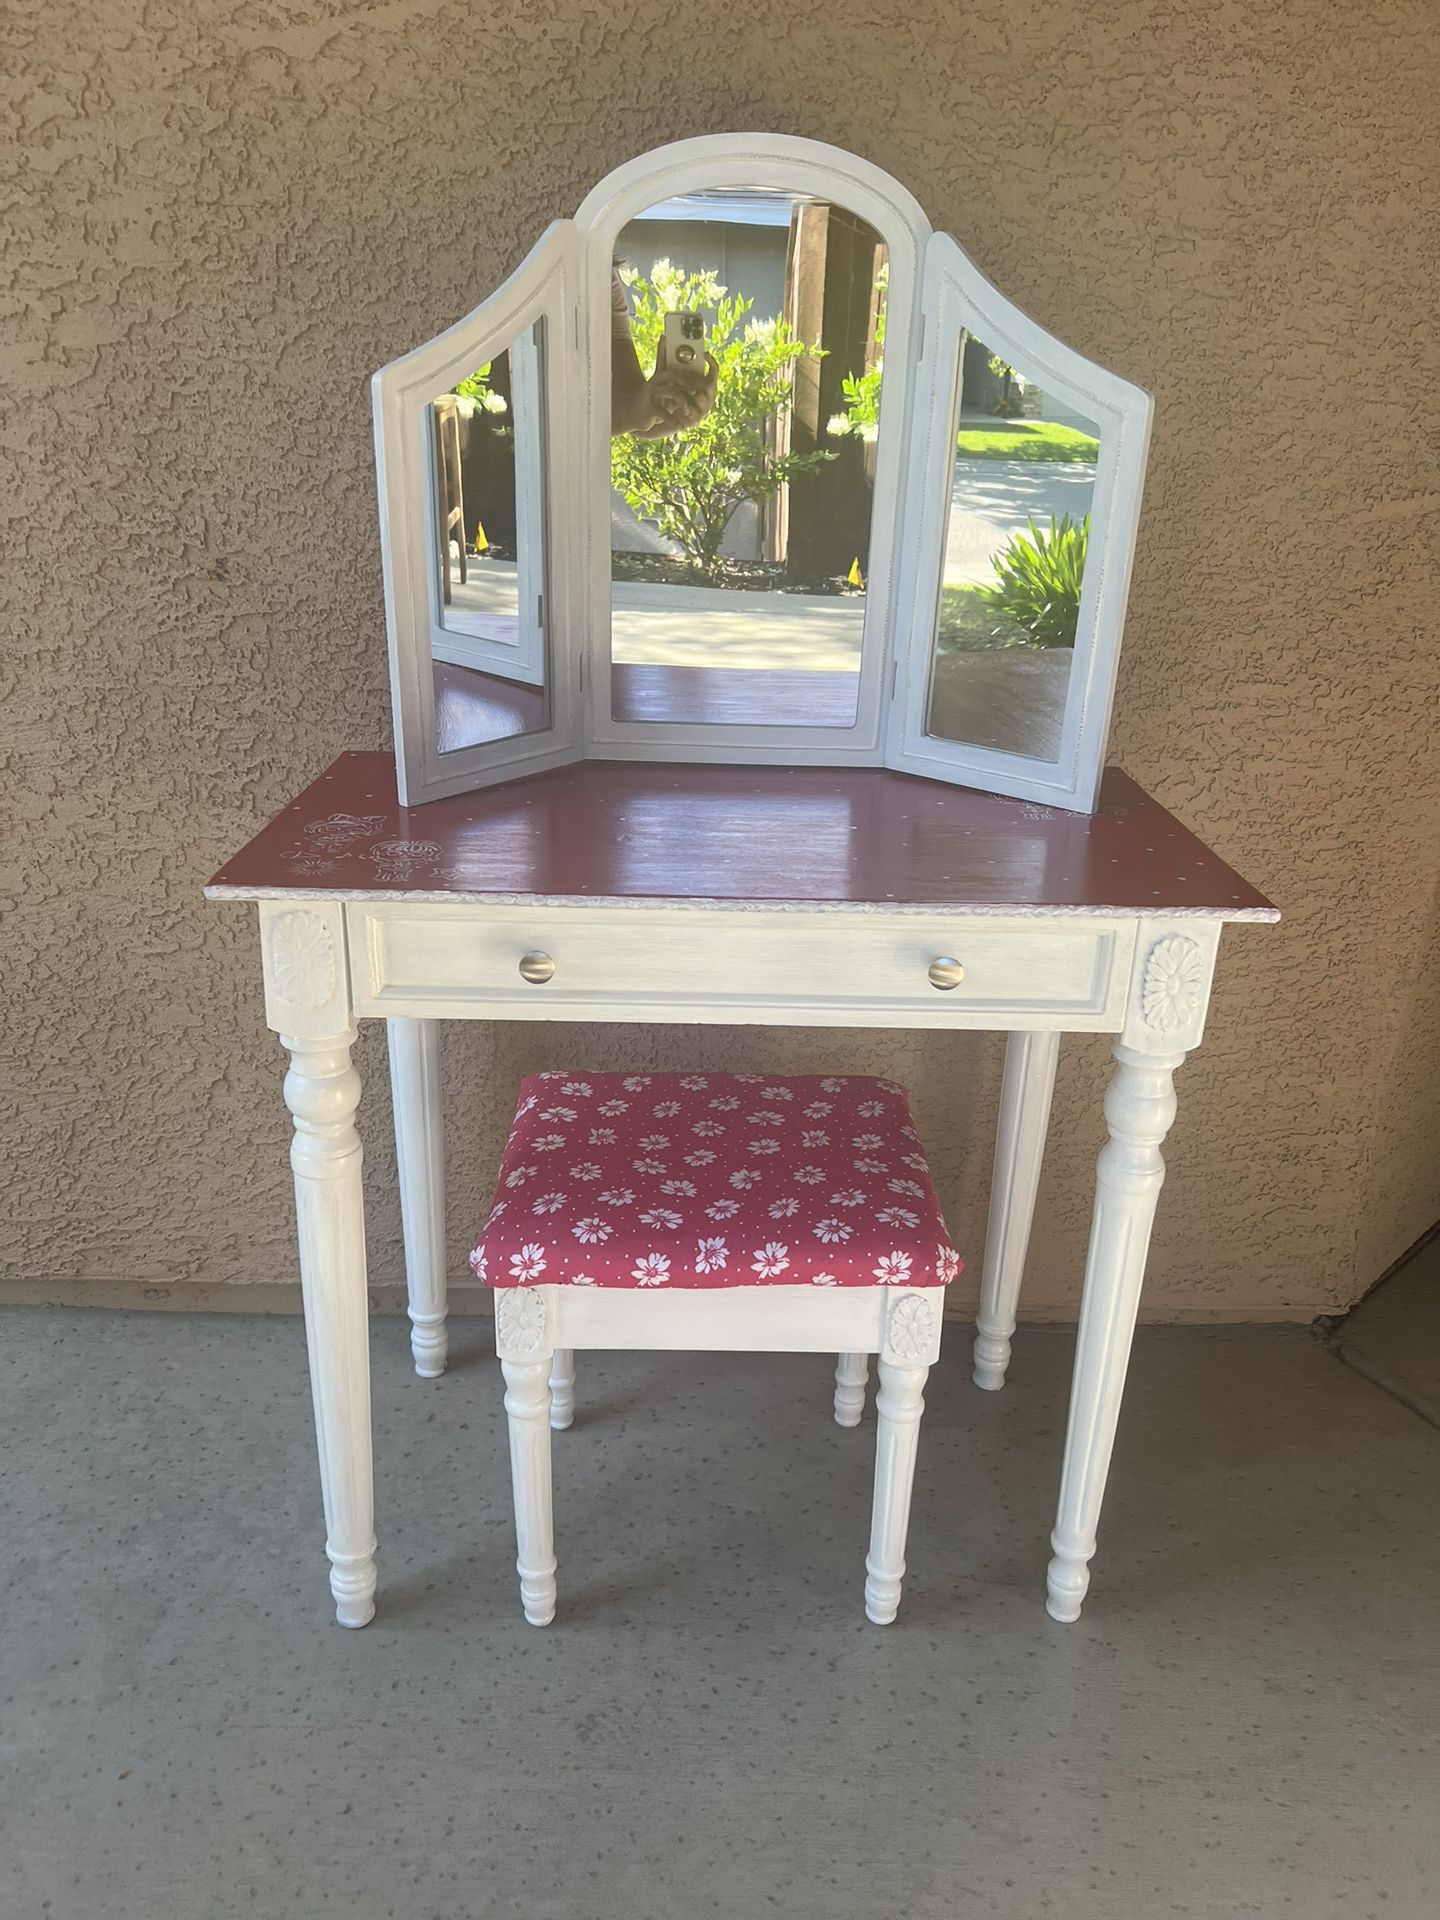 Antique Vanity Desk/ Make Up Table for Girls with Mirrors